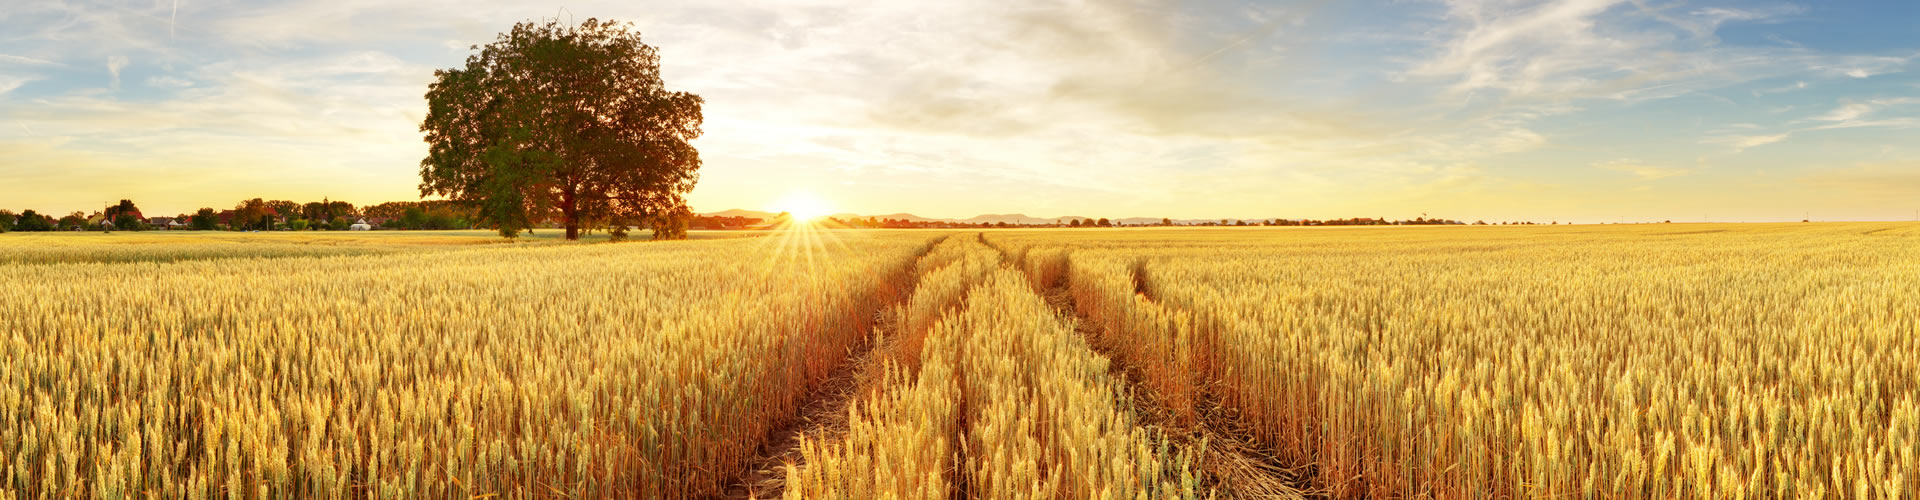 Agriculture Loan Header: Wheat Field